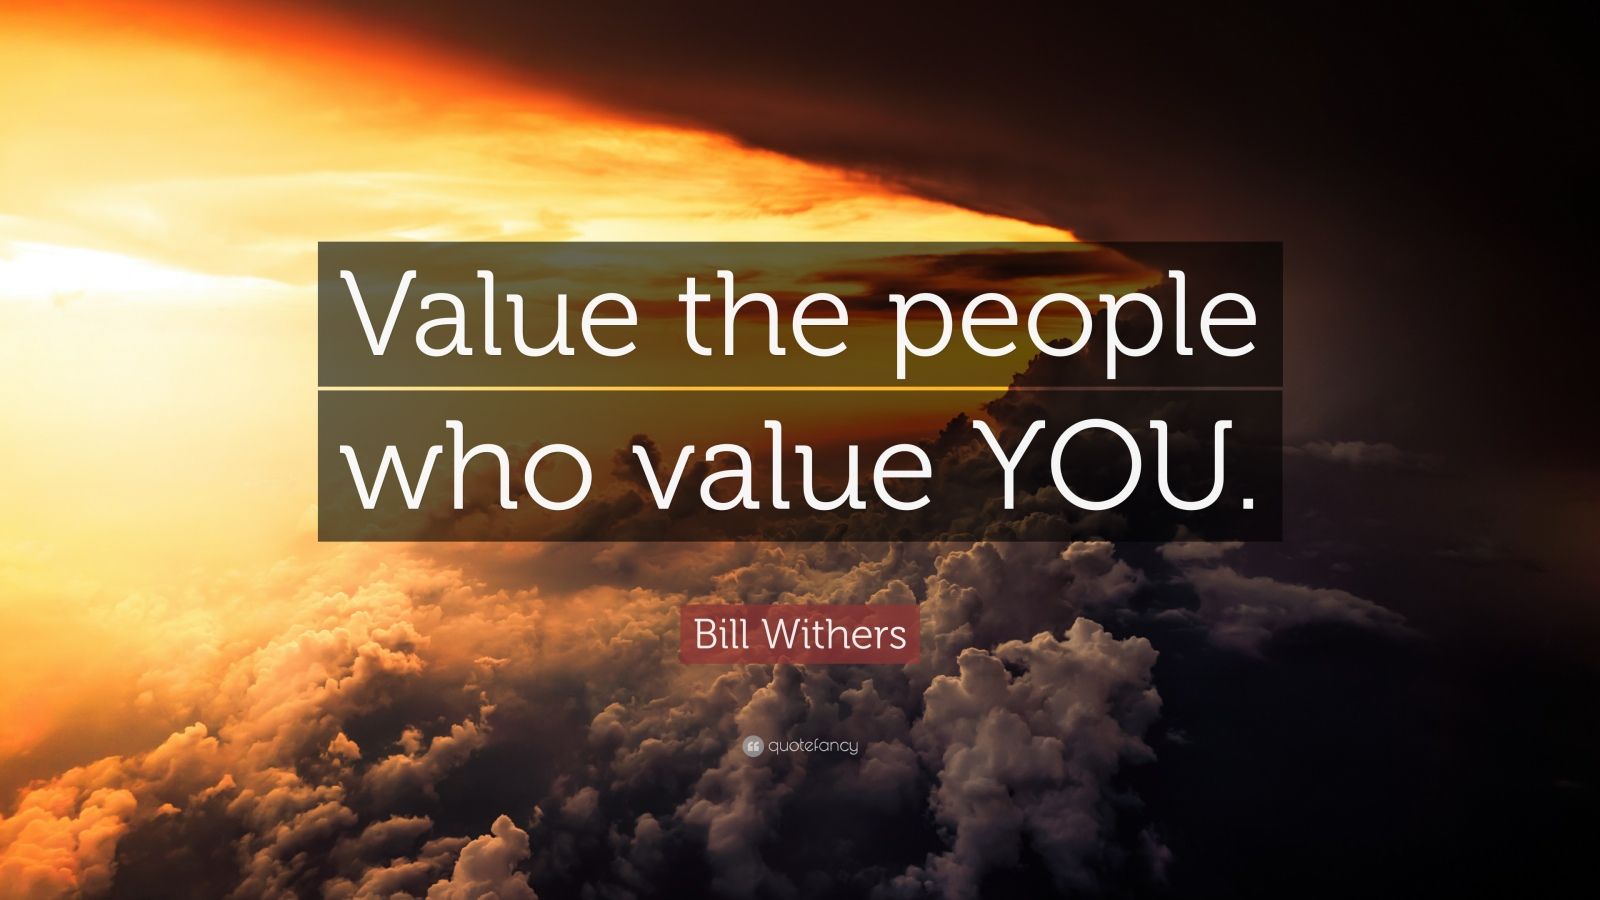 Bill Withers Quote “Value the people who value YOU.” (10 wallpapers